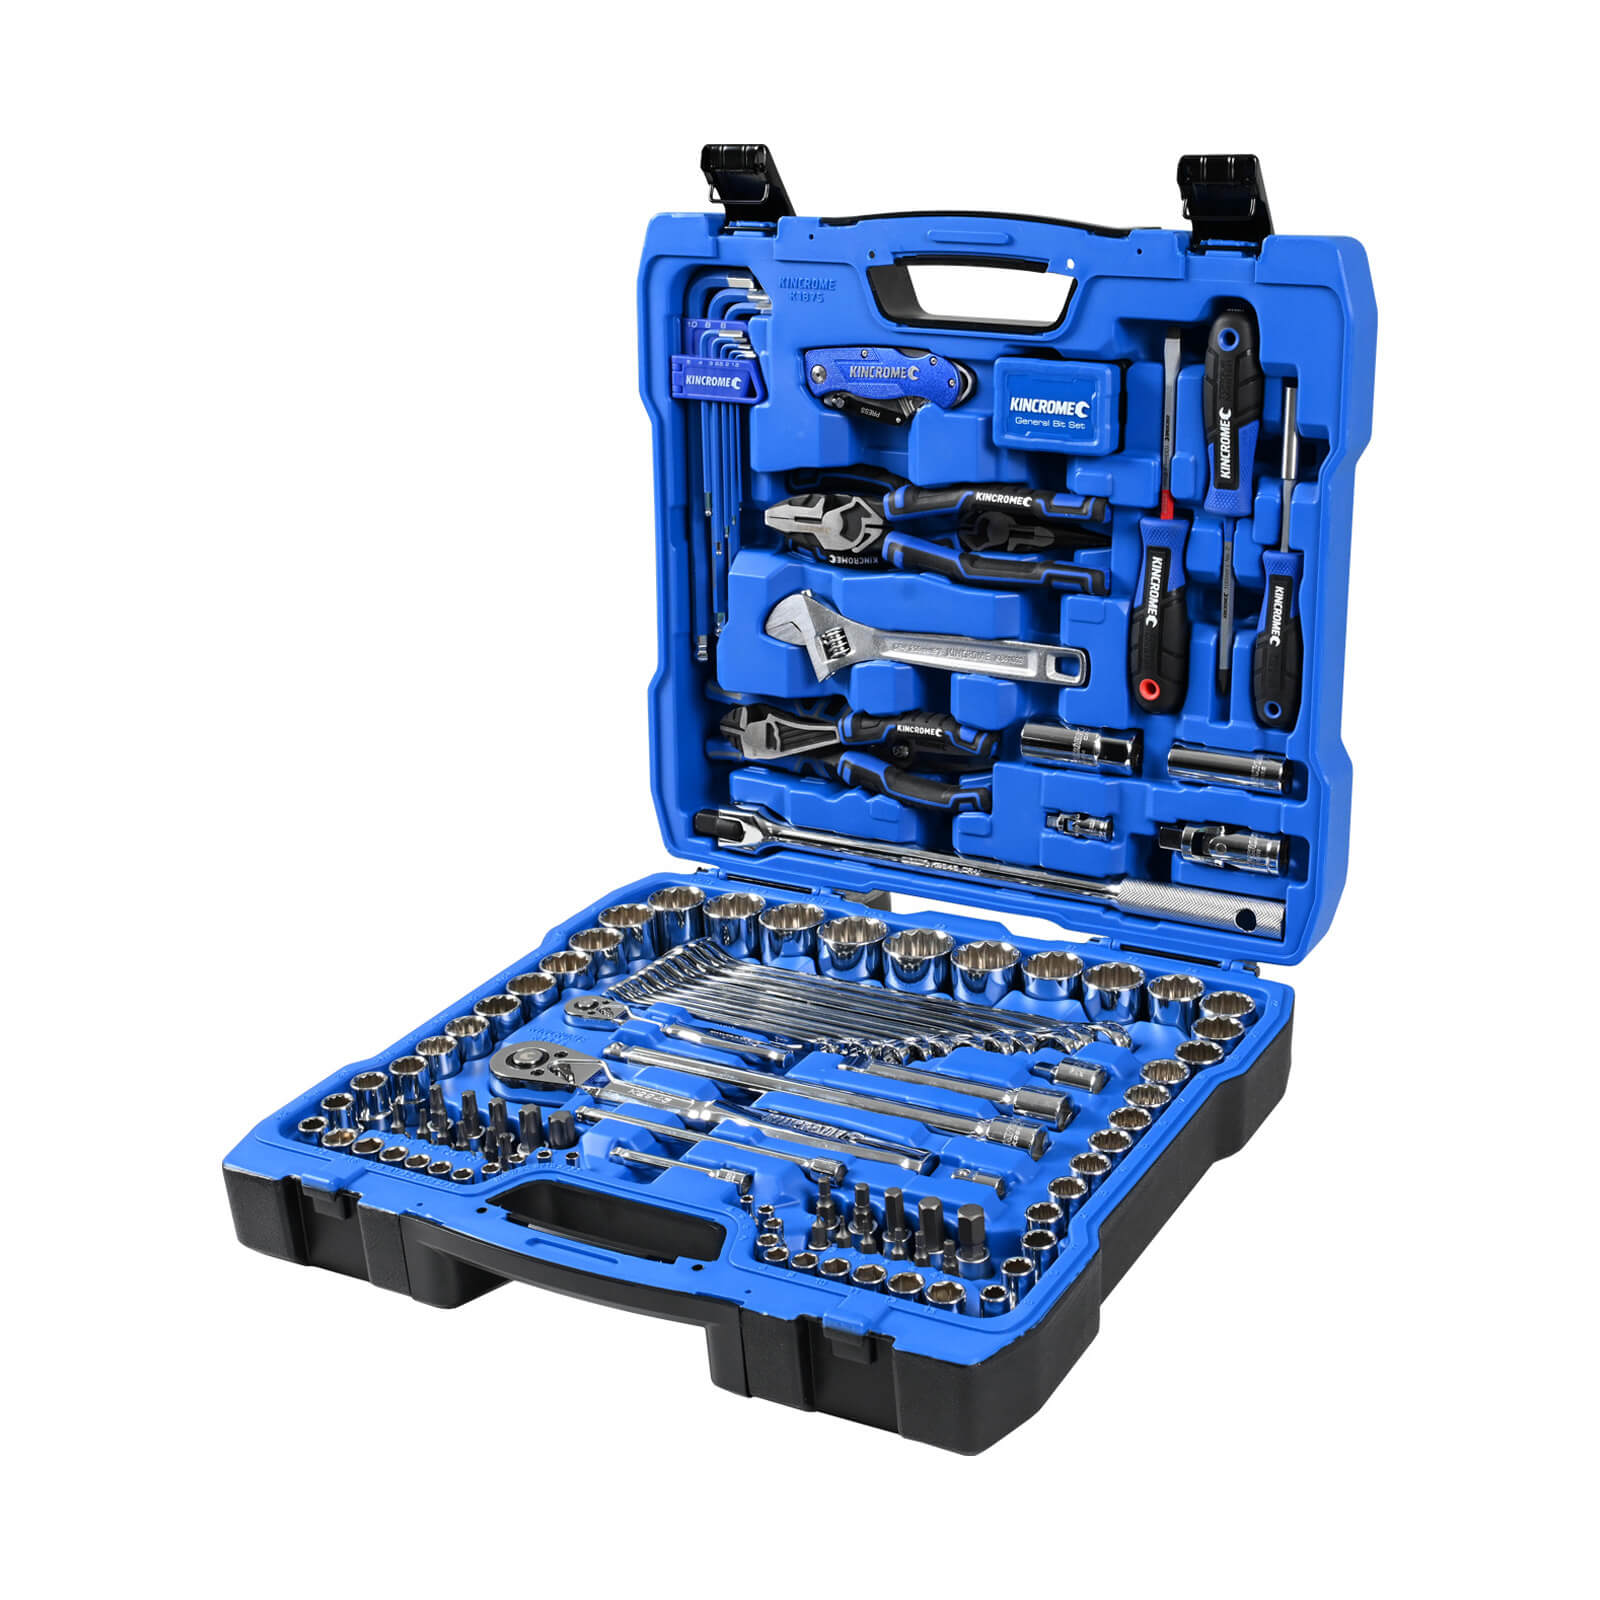 Portable Workshop Tool Kit 150 Piece - K1875 by Kincrome